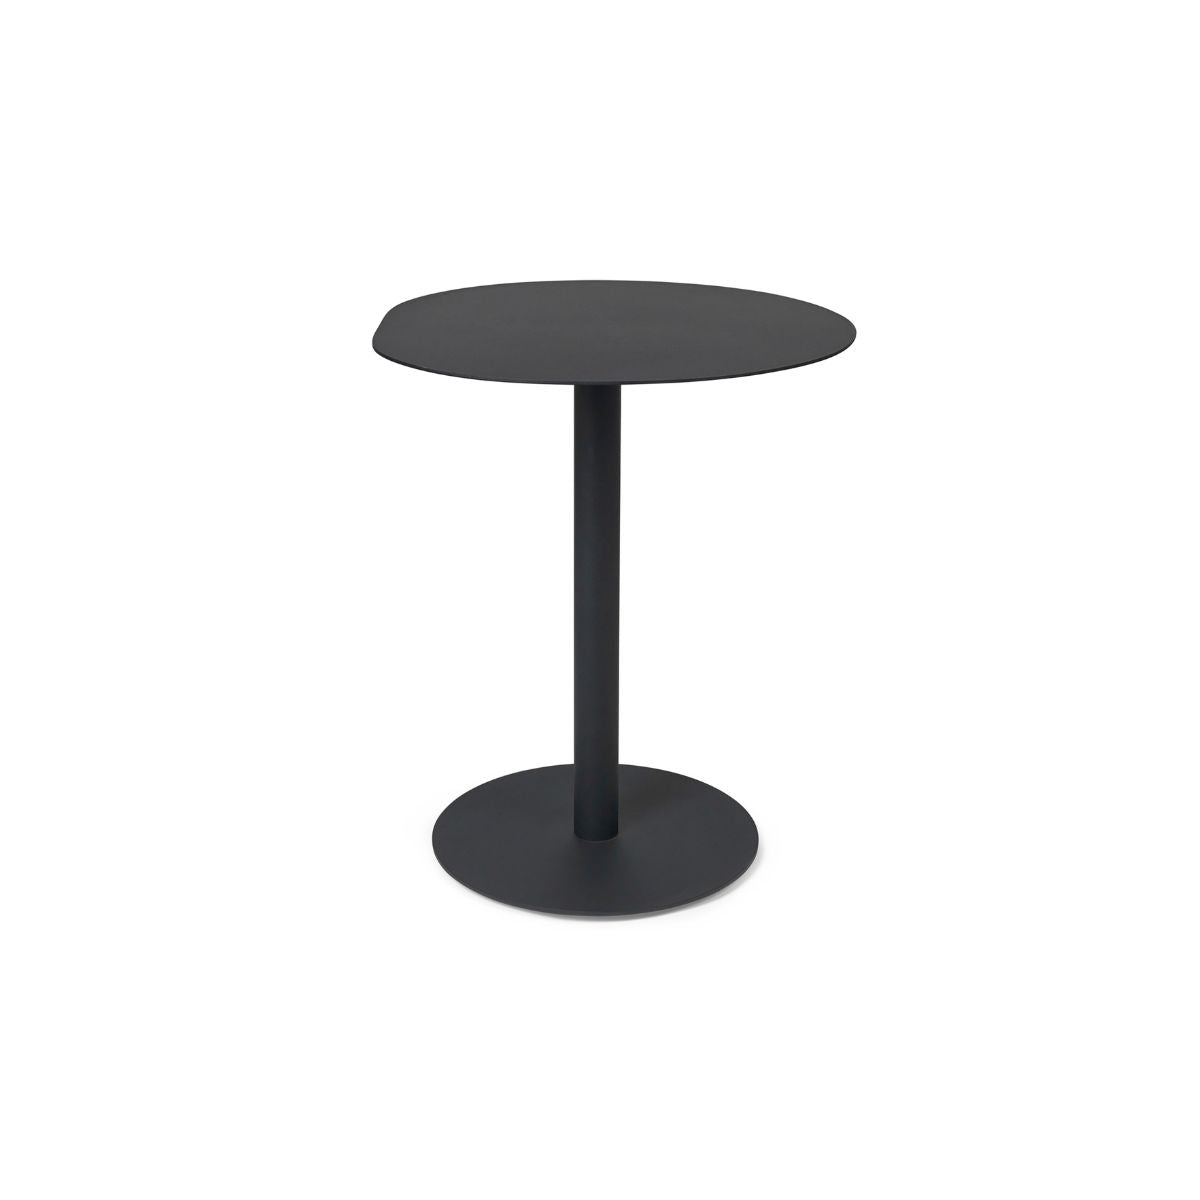 ferm LIVING Pond Cafe Table. Free UK delivery at someday designs